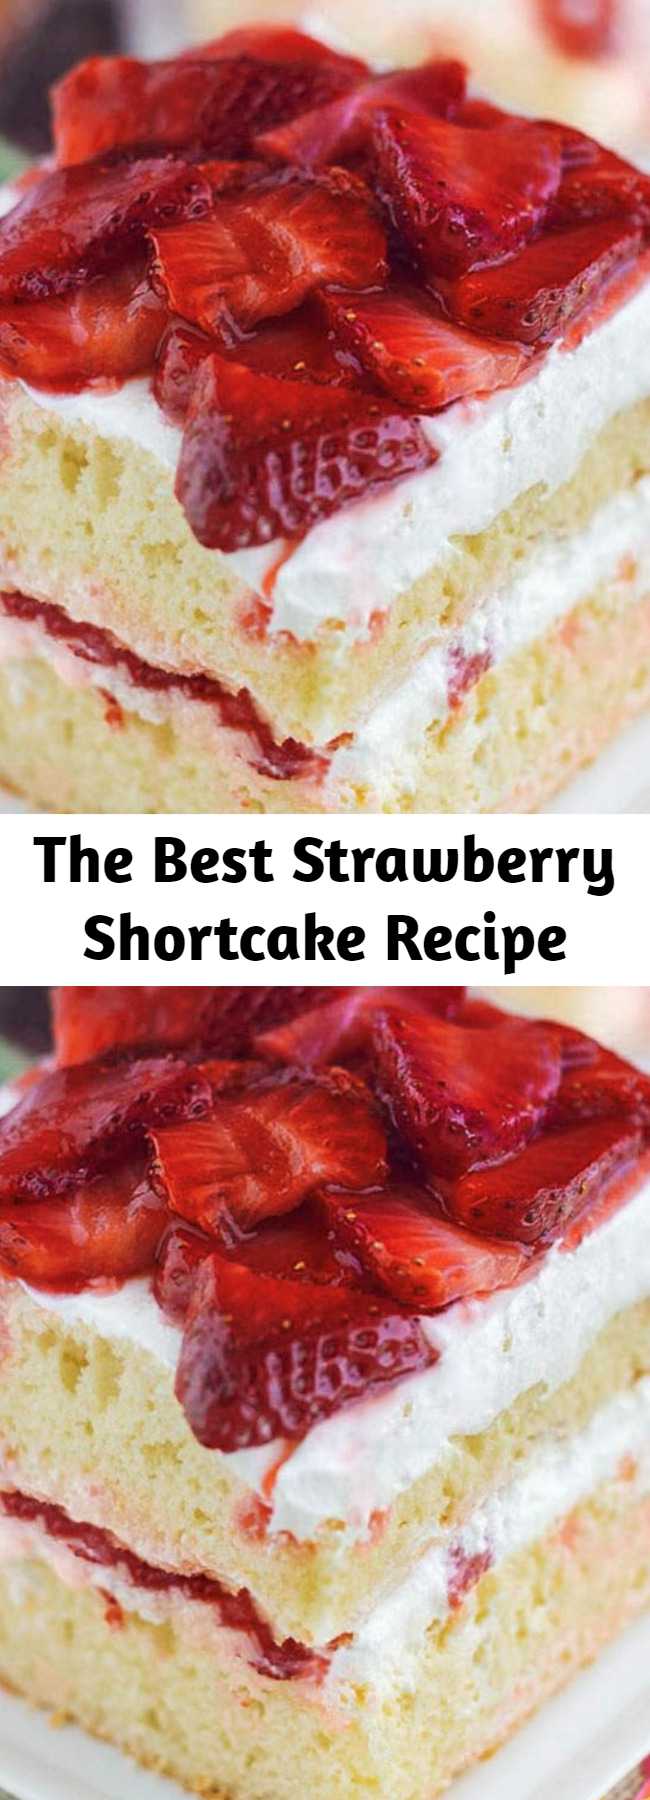 The Best Strawberry Shortcake Recipe - The Best STRAWBERRY SHORTCAKE CAKE recipe featuring a moist white layer cake filled with strawberries and whipped cream topping. The quintessential summer dessert cake with freshly sliced strawberries and cream.